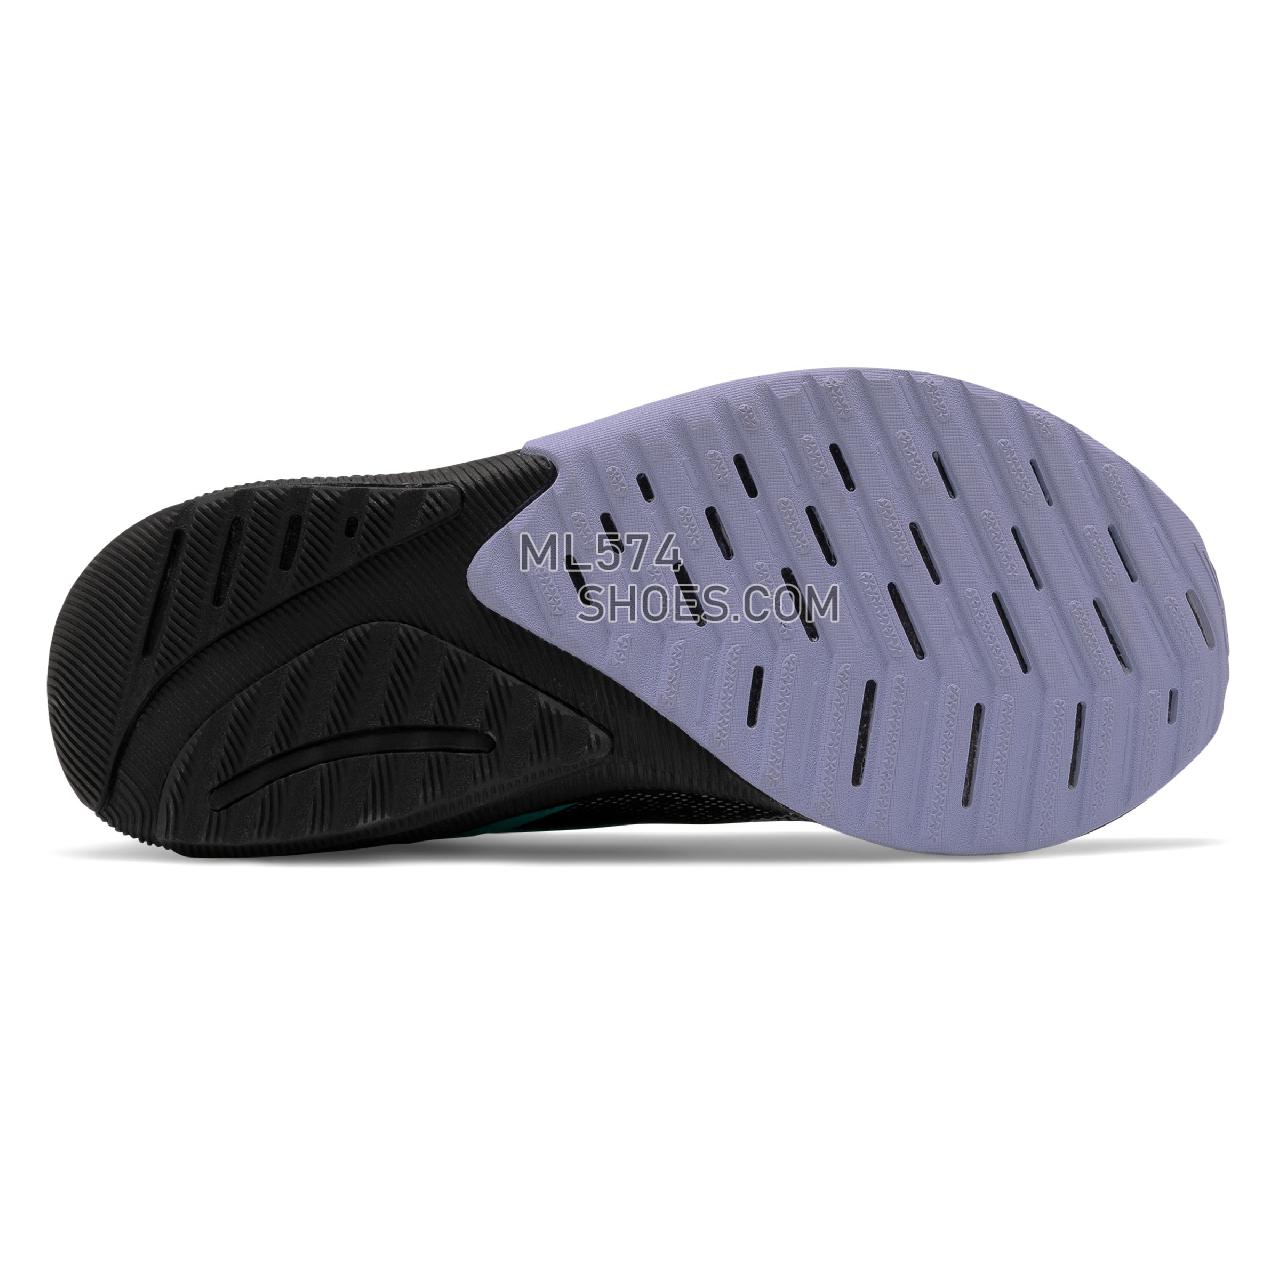 New Balance FuelCell Propel RMX - Women's Fuelcell Sleek And LightWeight - Black with Tidepool and Mystic Purple - WPRMXLB